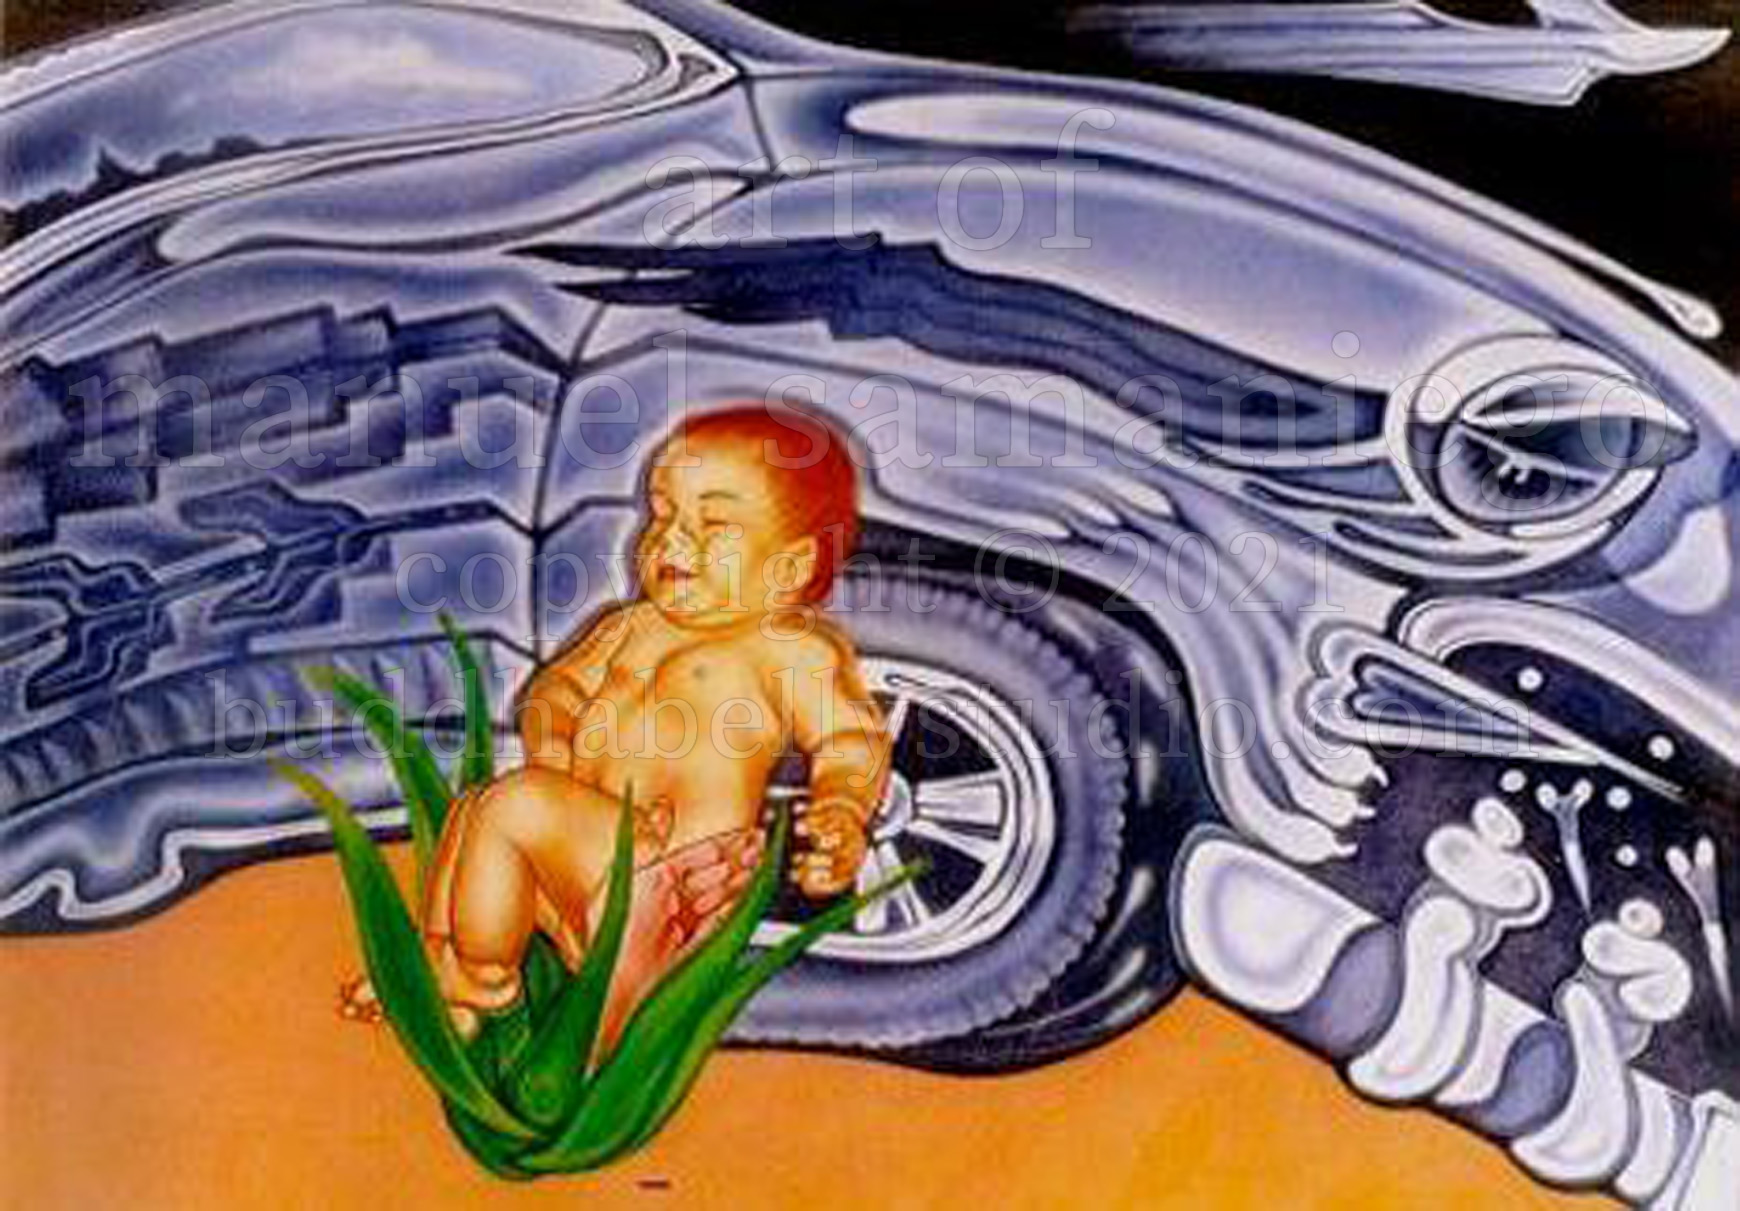 a baby, a cactus and a vehicle